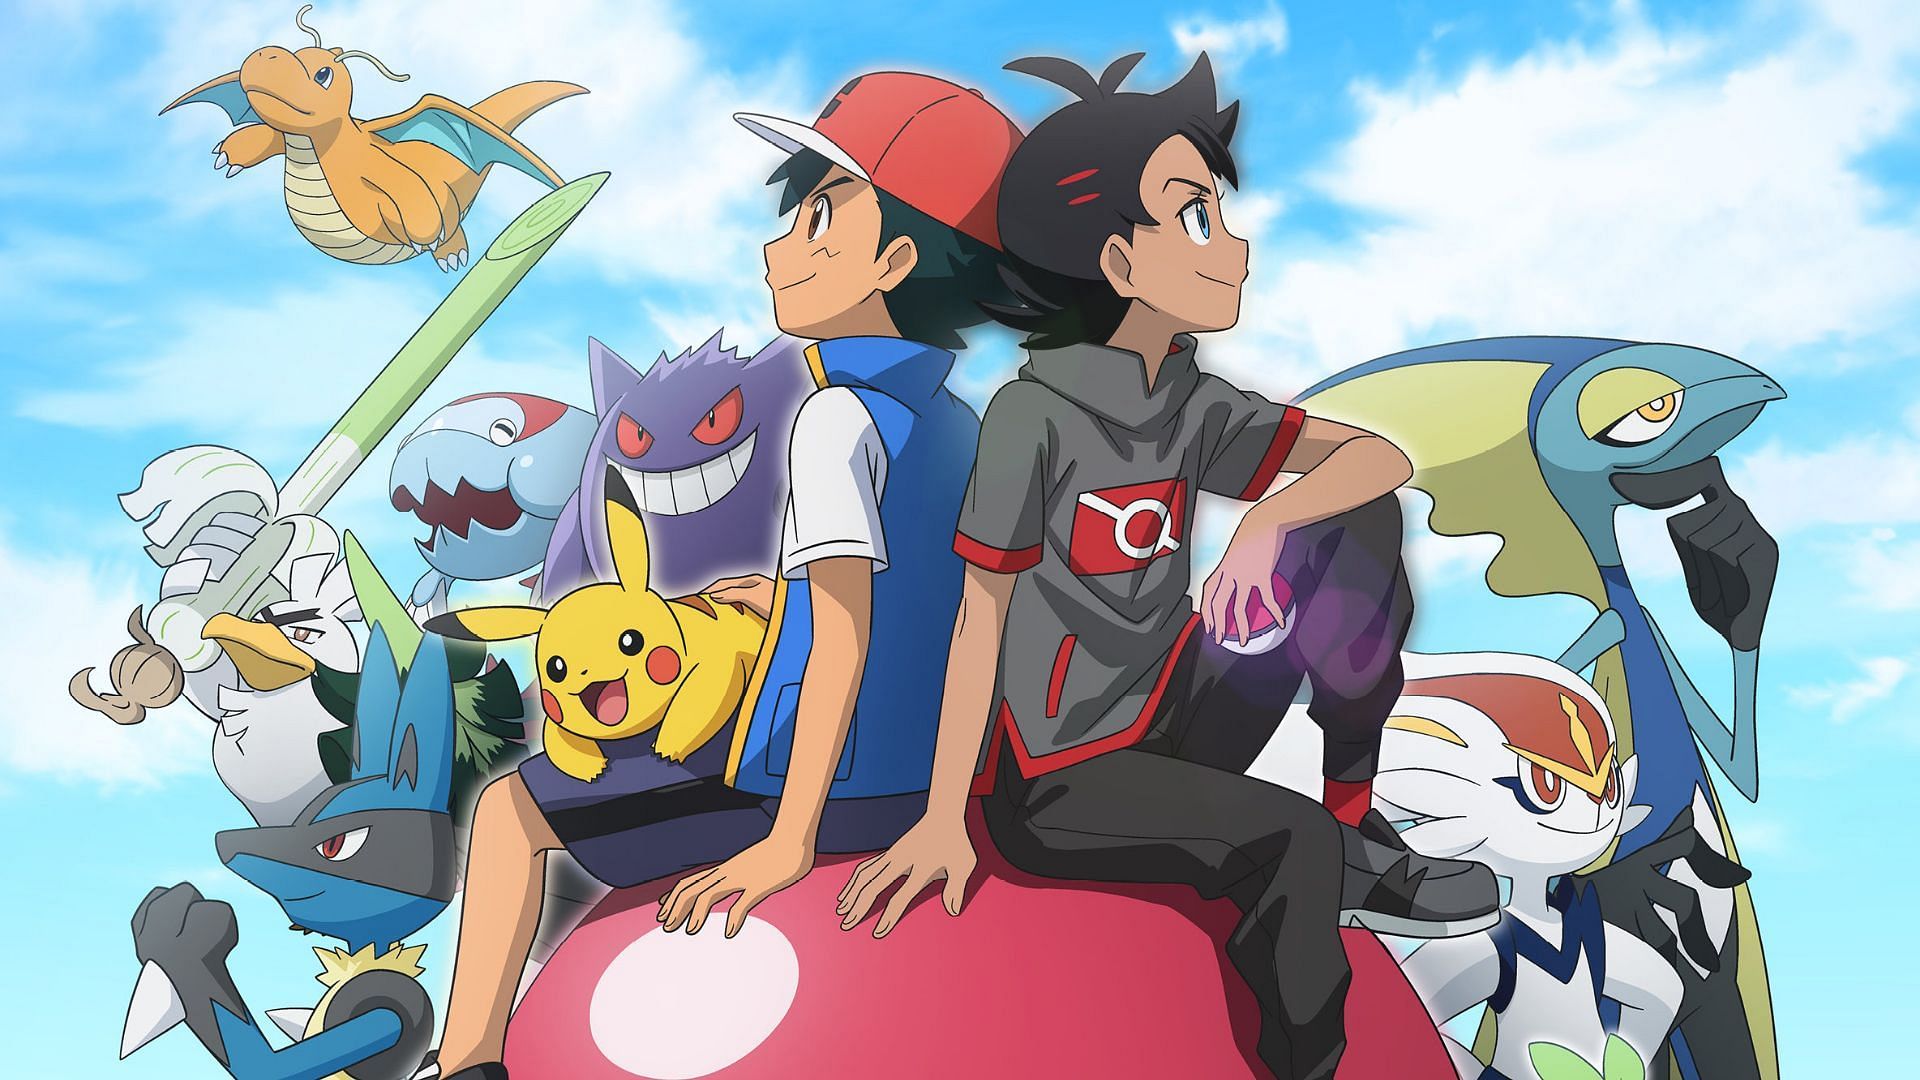 Pokémon Journeys episode 131: release date and time, where to